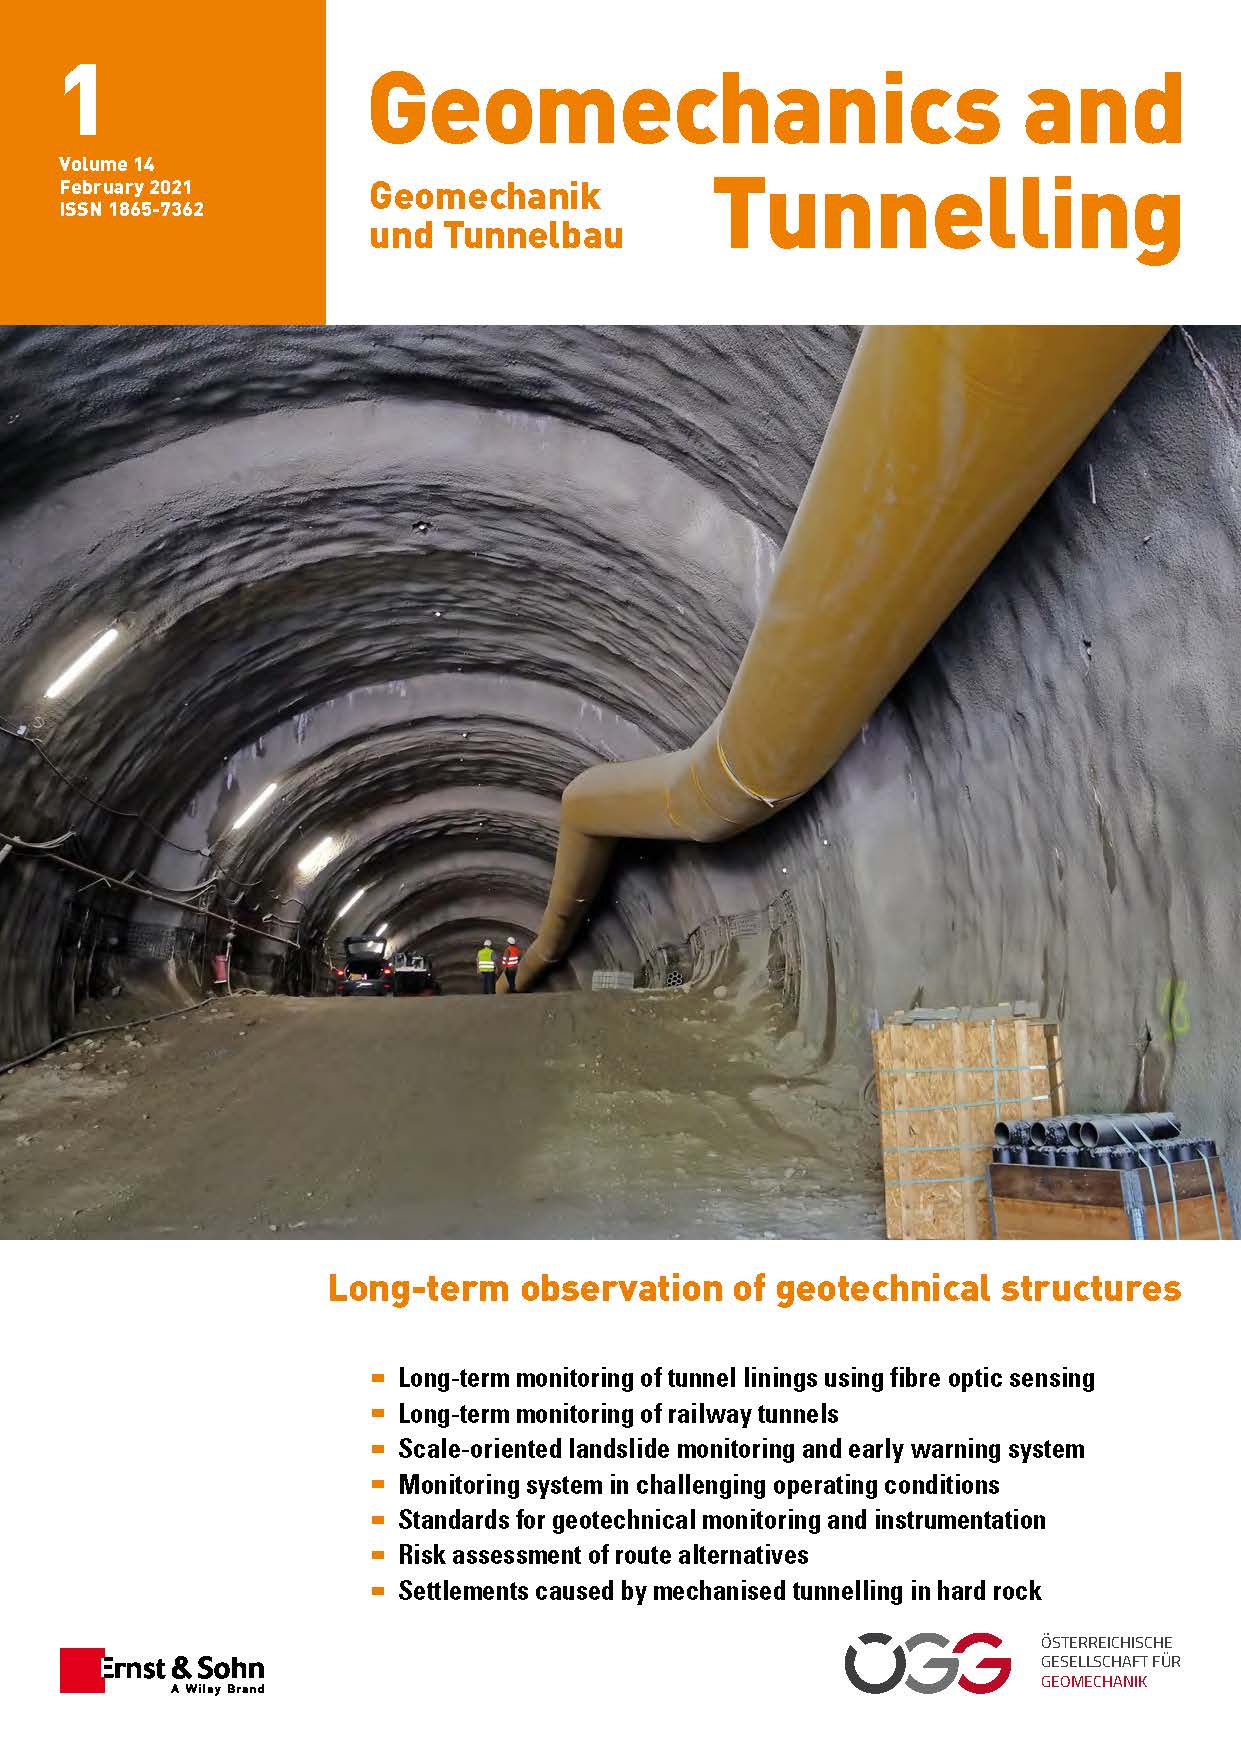 Journal Geomechanics and Tunnelling 1/21 published